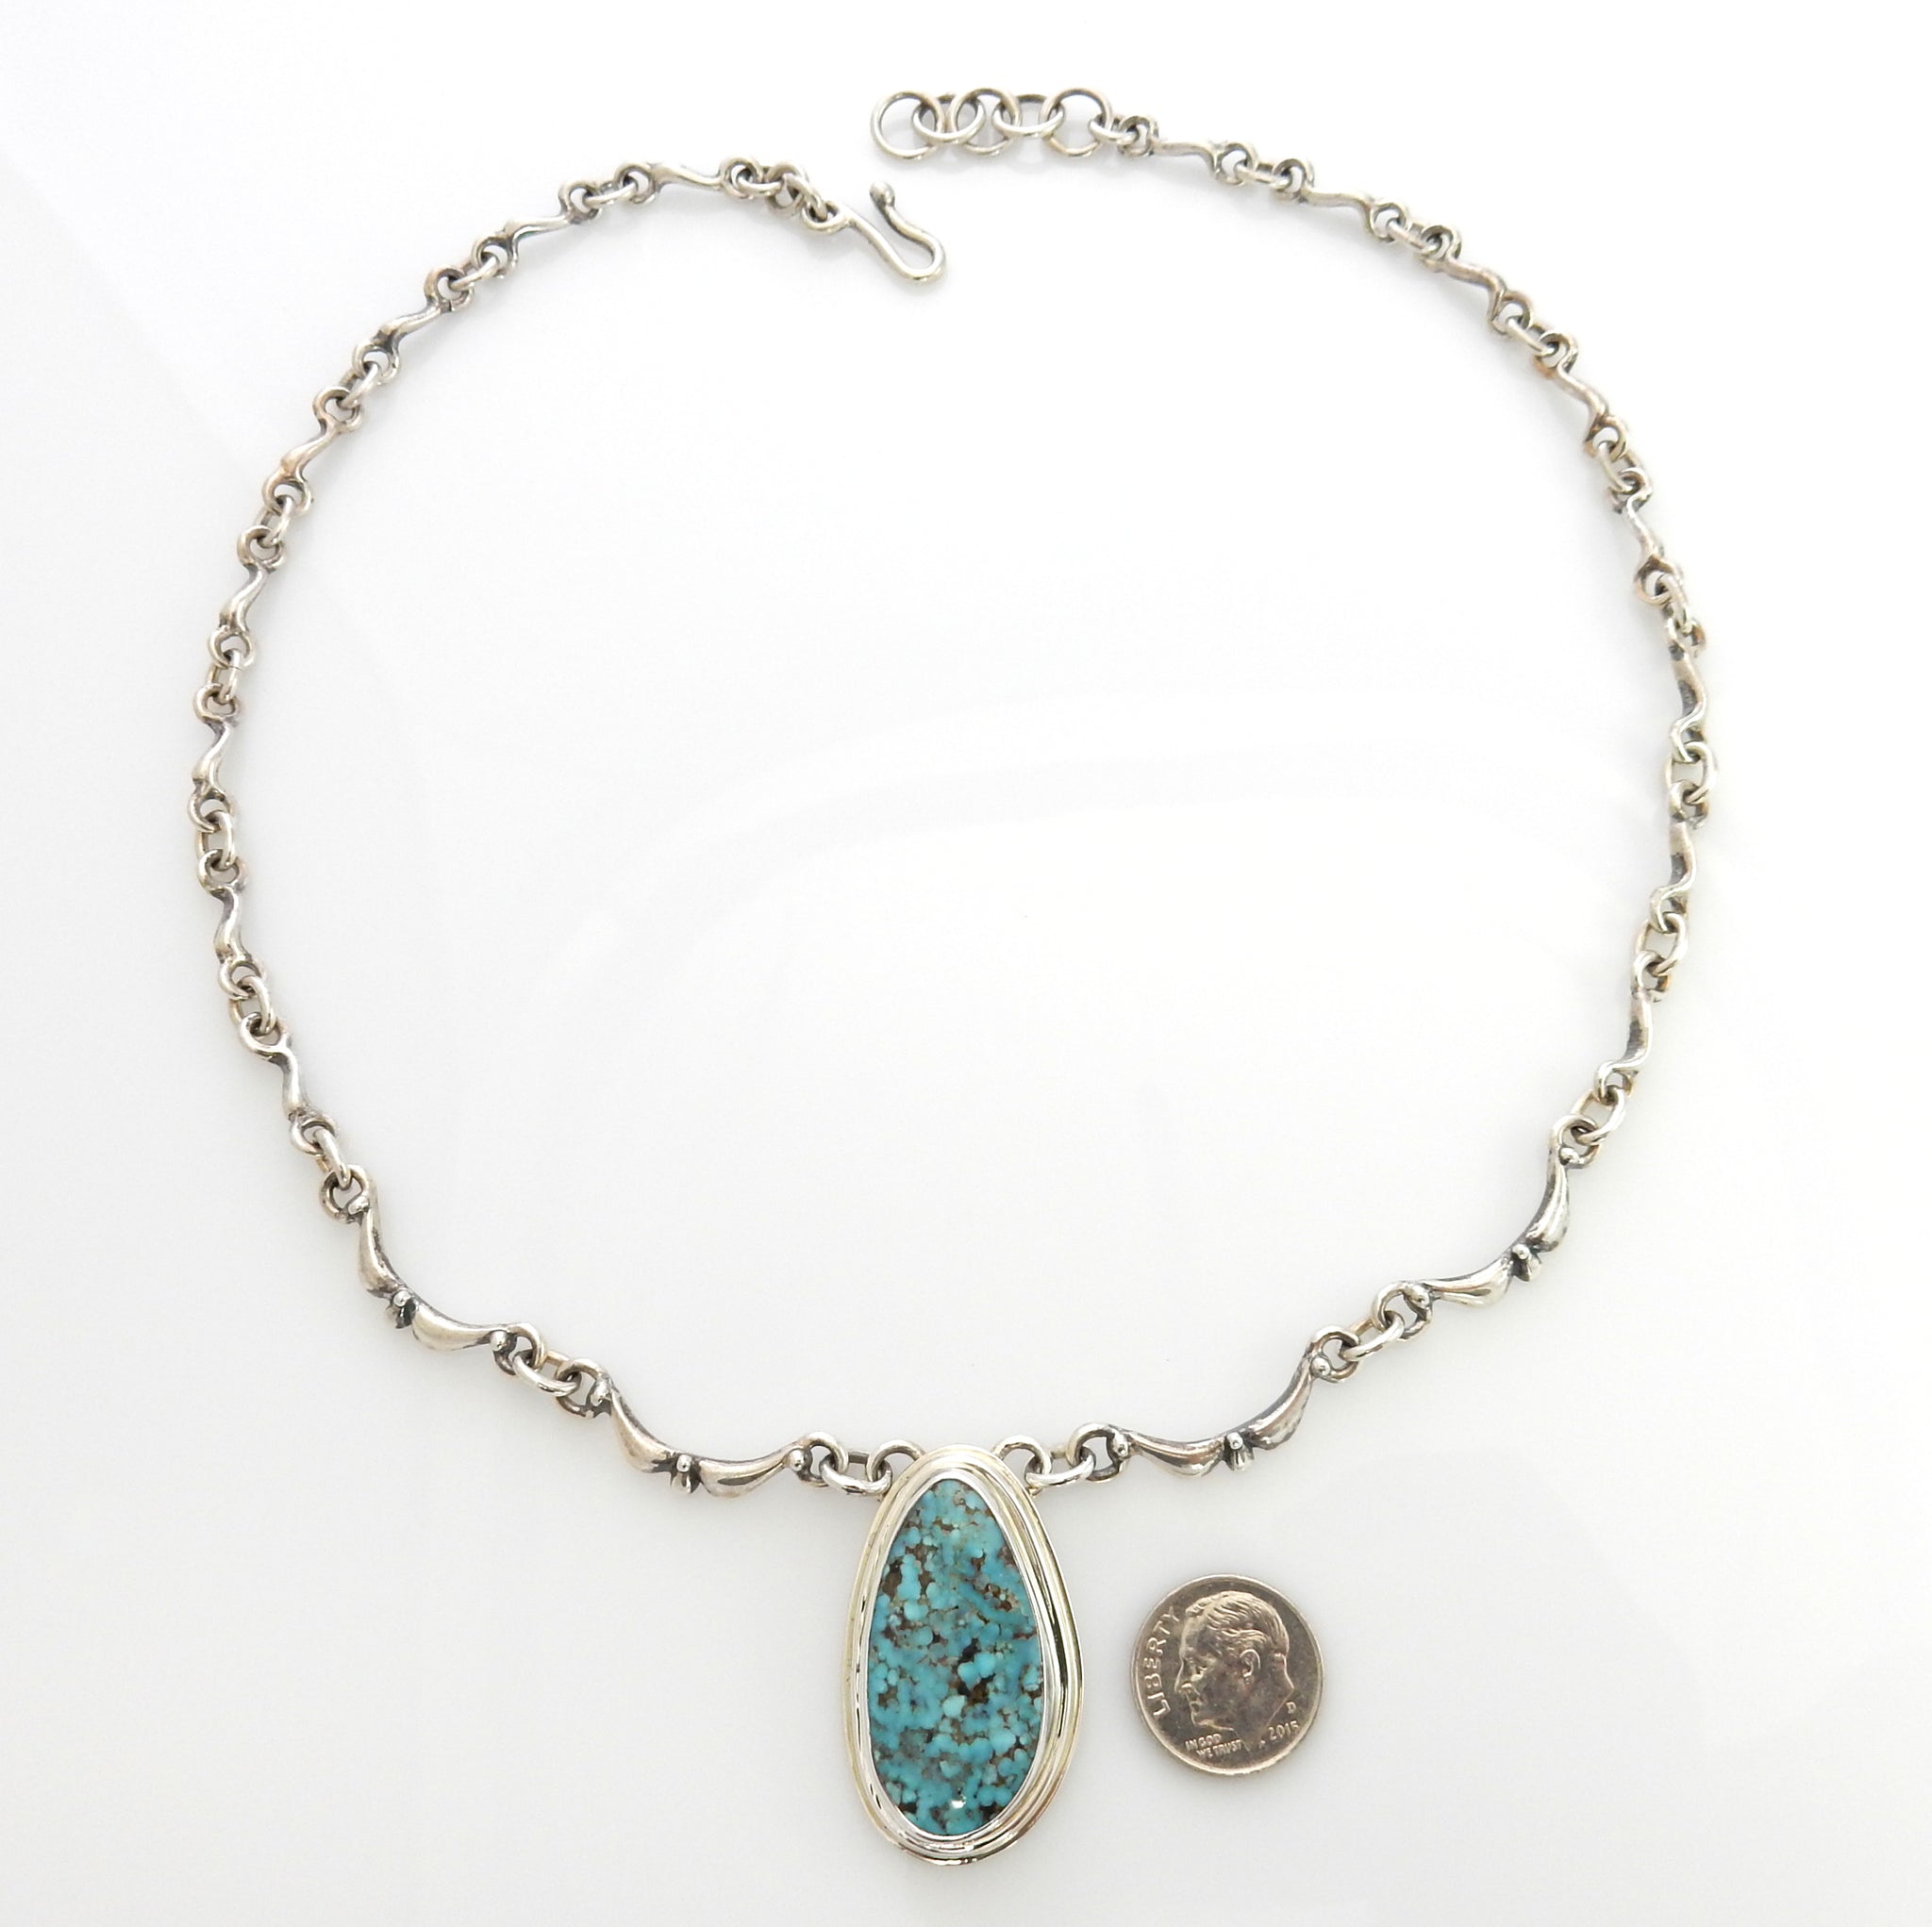 Beautiful Adjustable 19.5" Inch Handmade Sterling Silver Blue Natural Turquoise Necklace